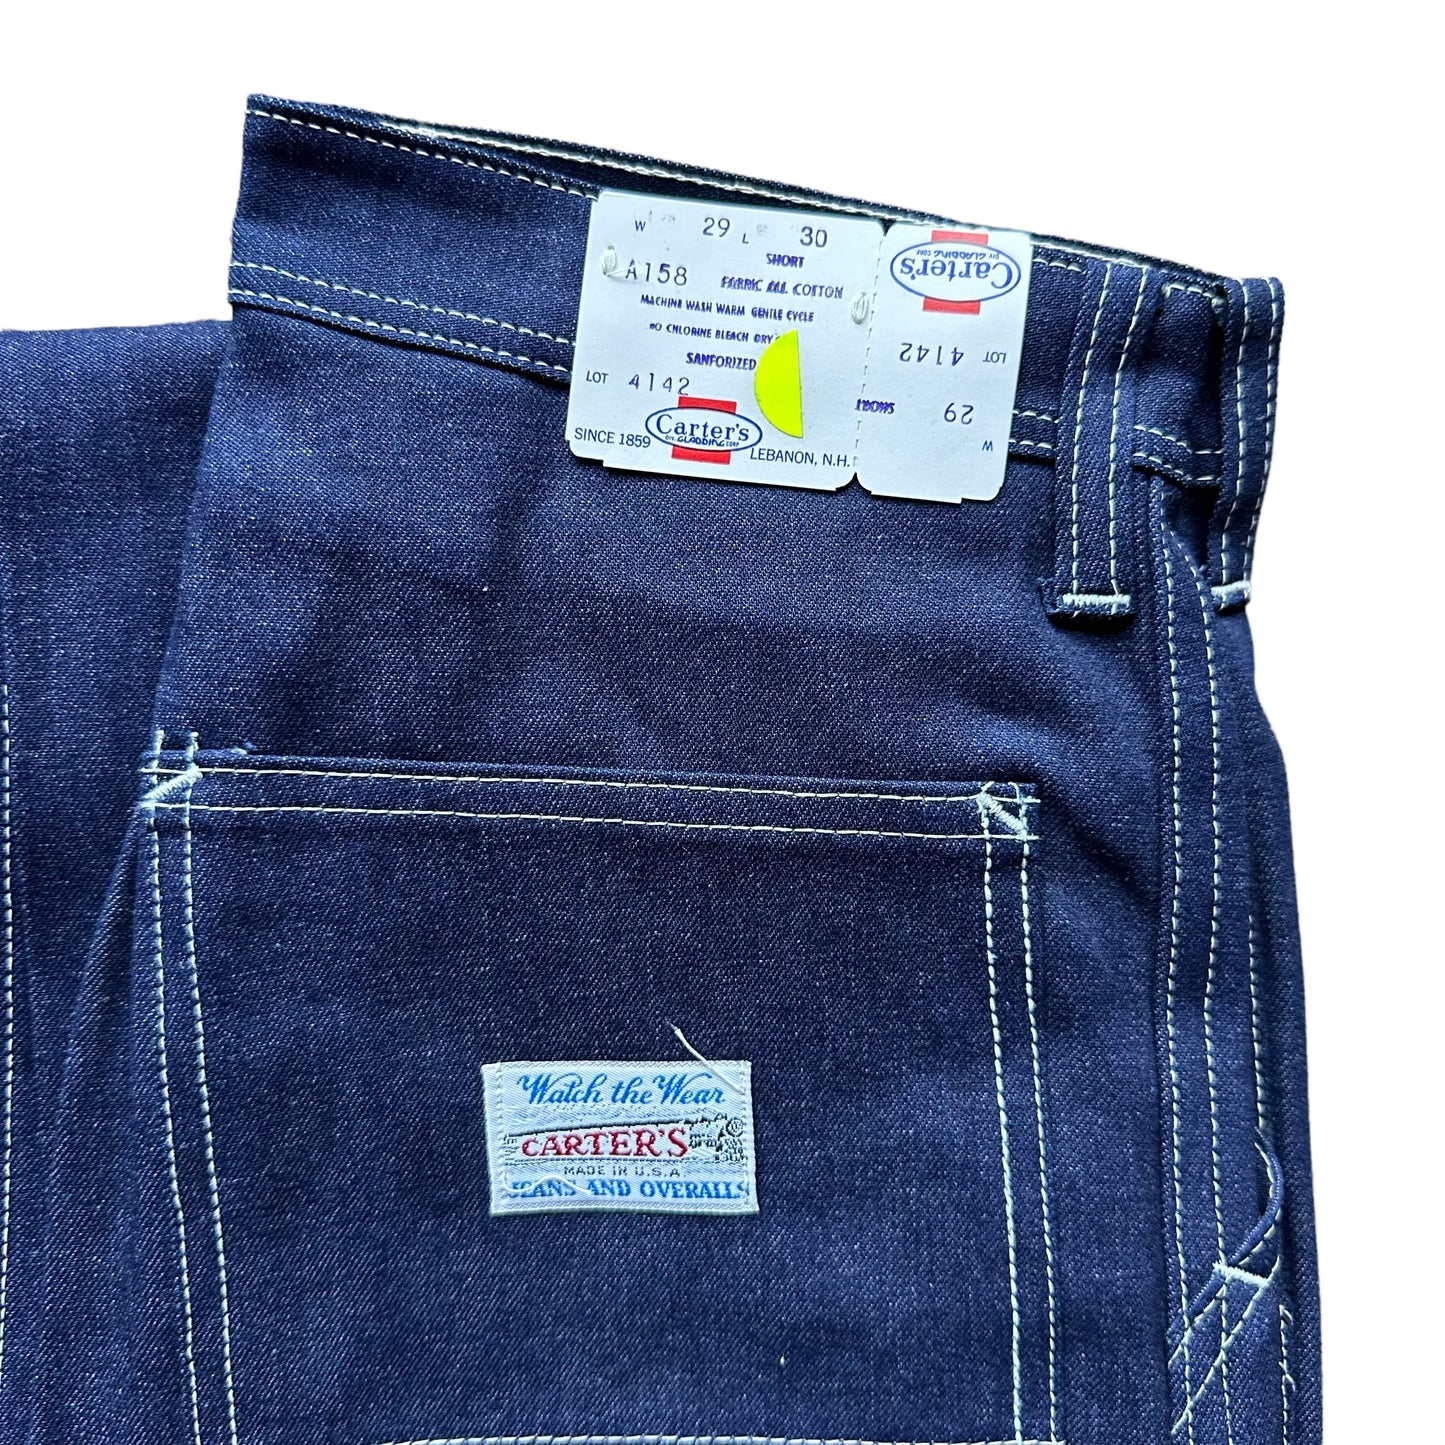 Tag Close Up View on New Old Stock Vintage Carter's Carpenter Dungarees W29 L30 | Vintage Workwear Seattle